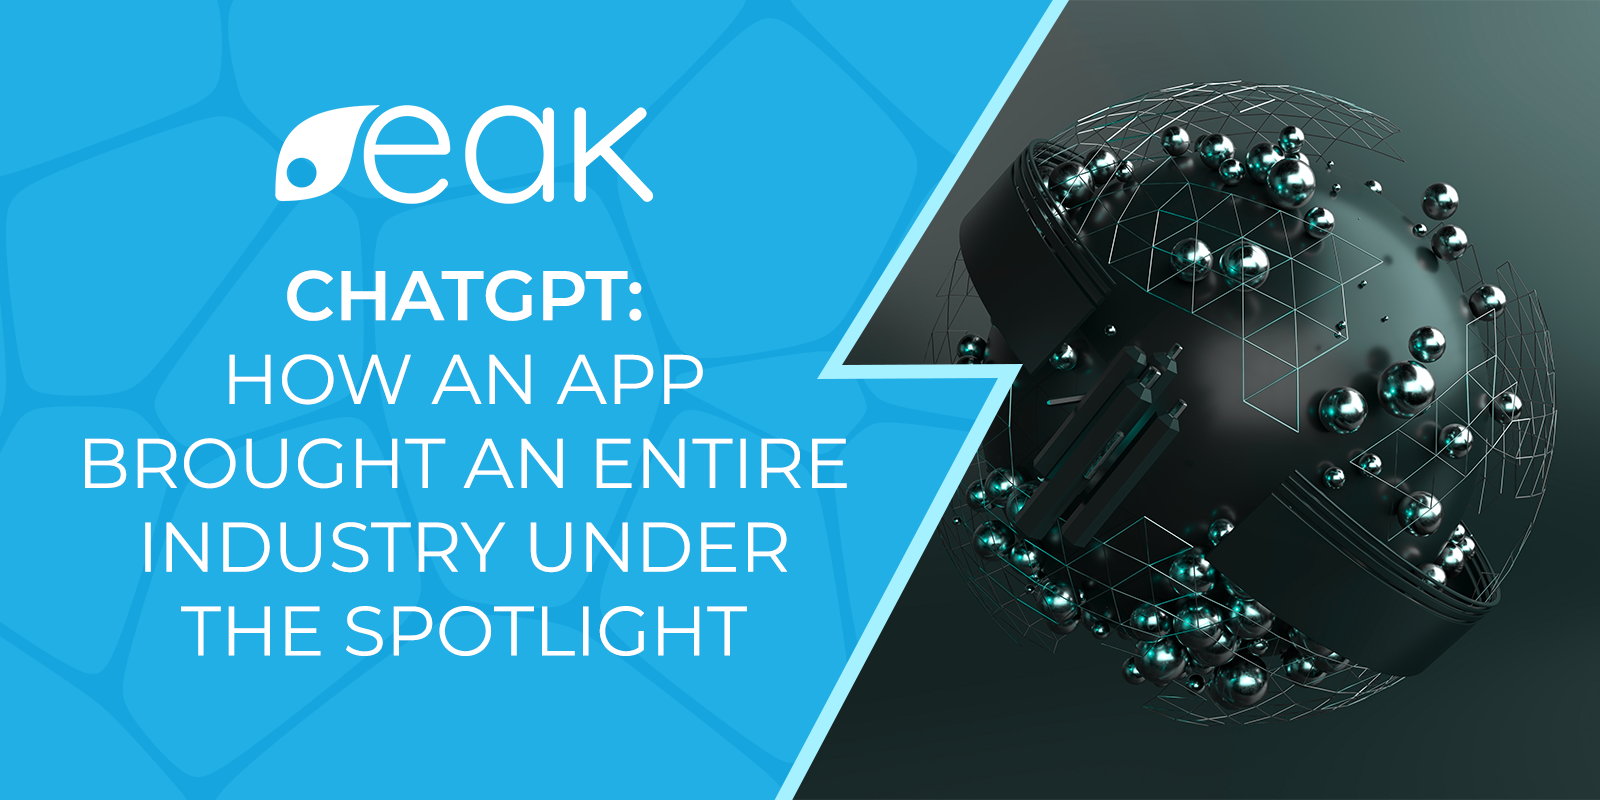 ChatGPT: How an app brought an entire industry under the spotlight